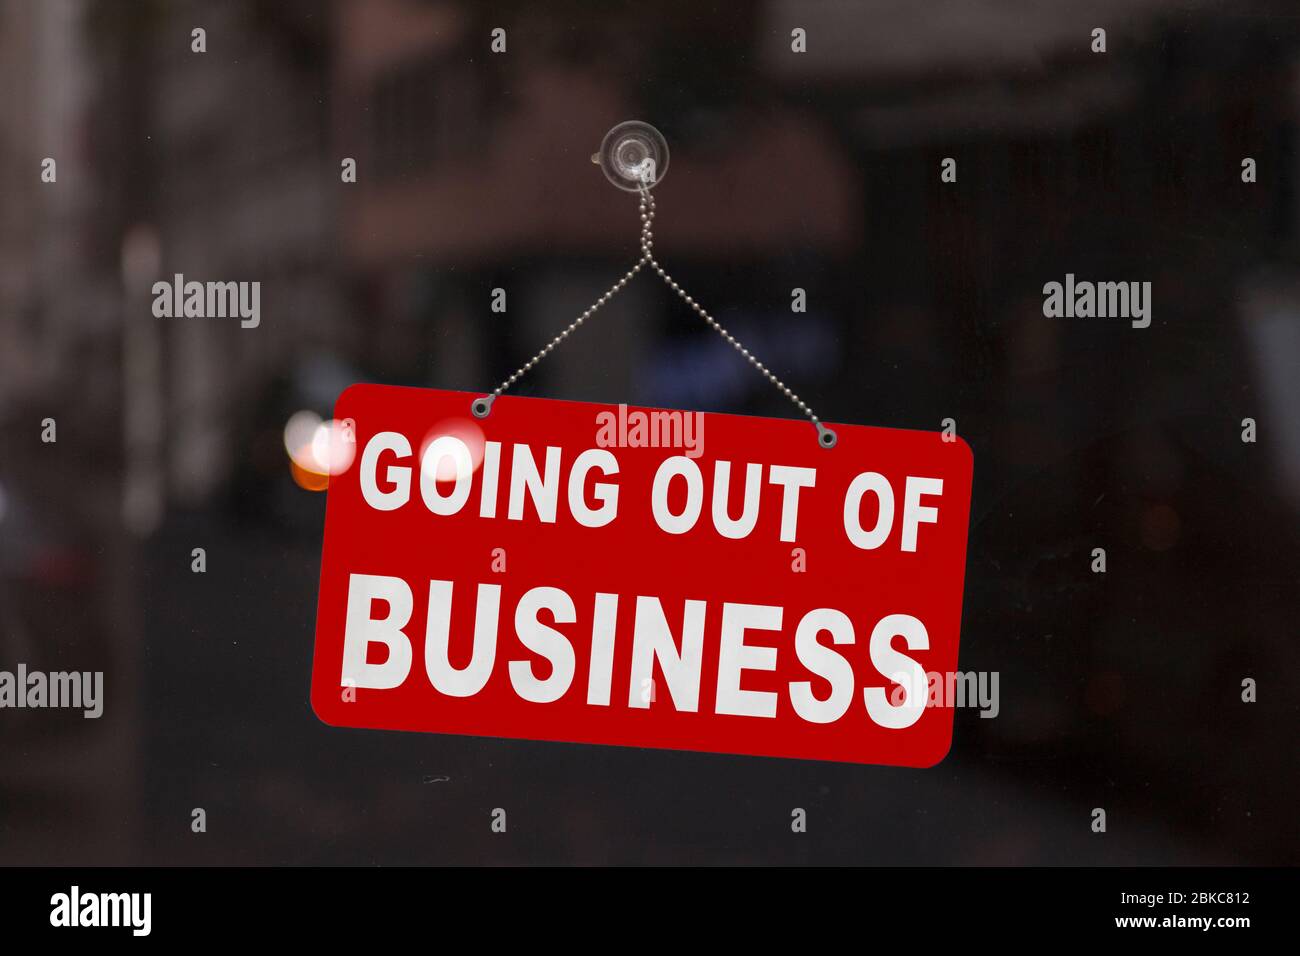 Close-up on a red closed sign in the window of a shop displaying the message 'Going out of business'. Stock Photo